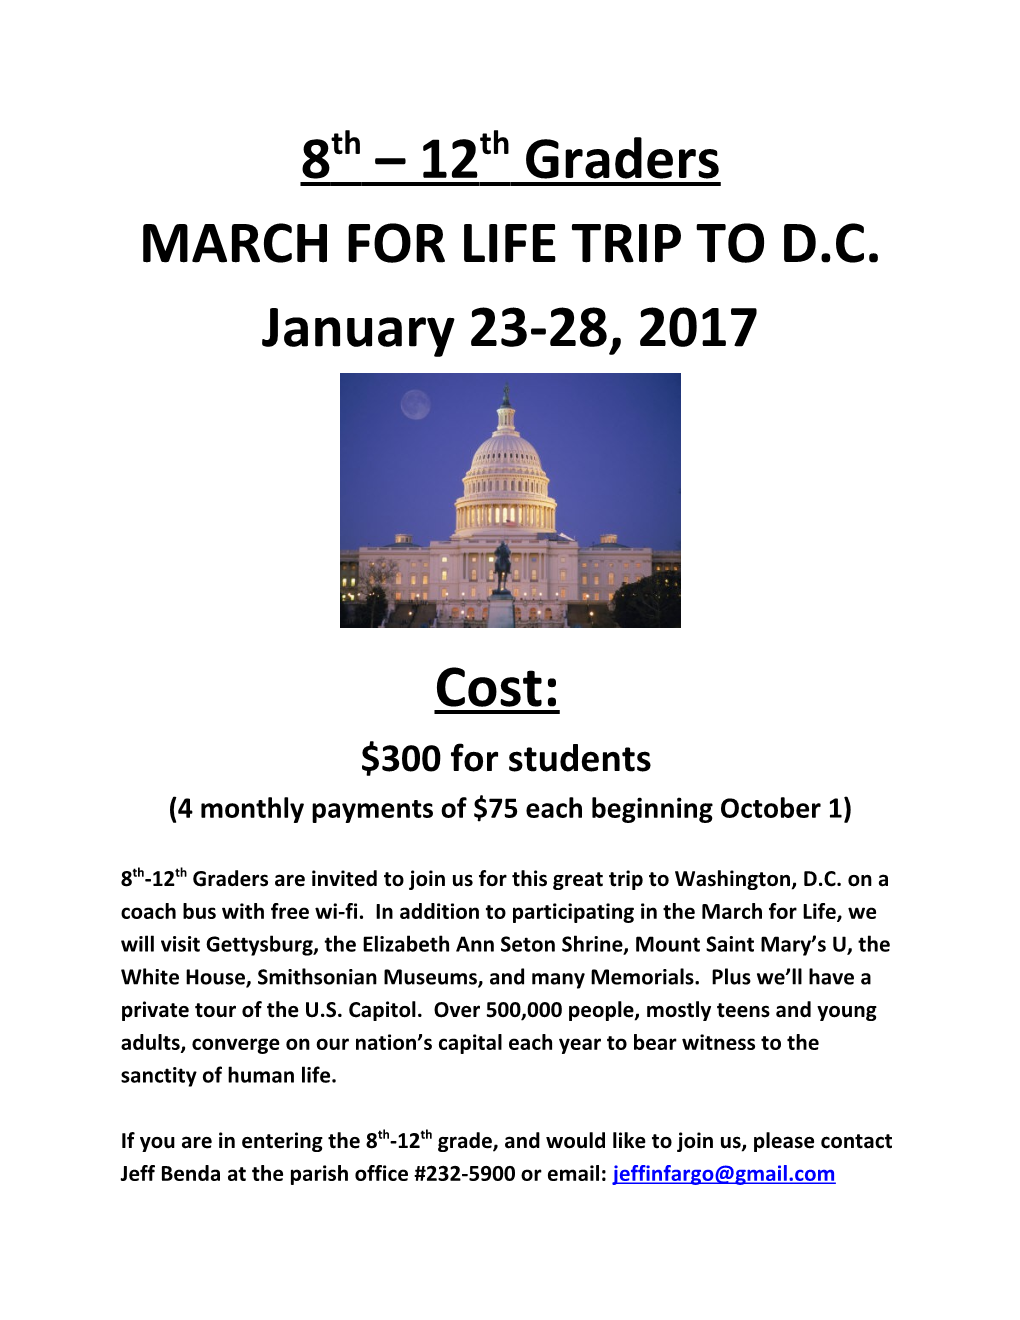 March for Life Trip to D.C